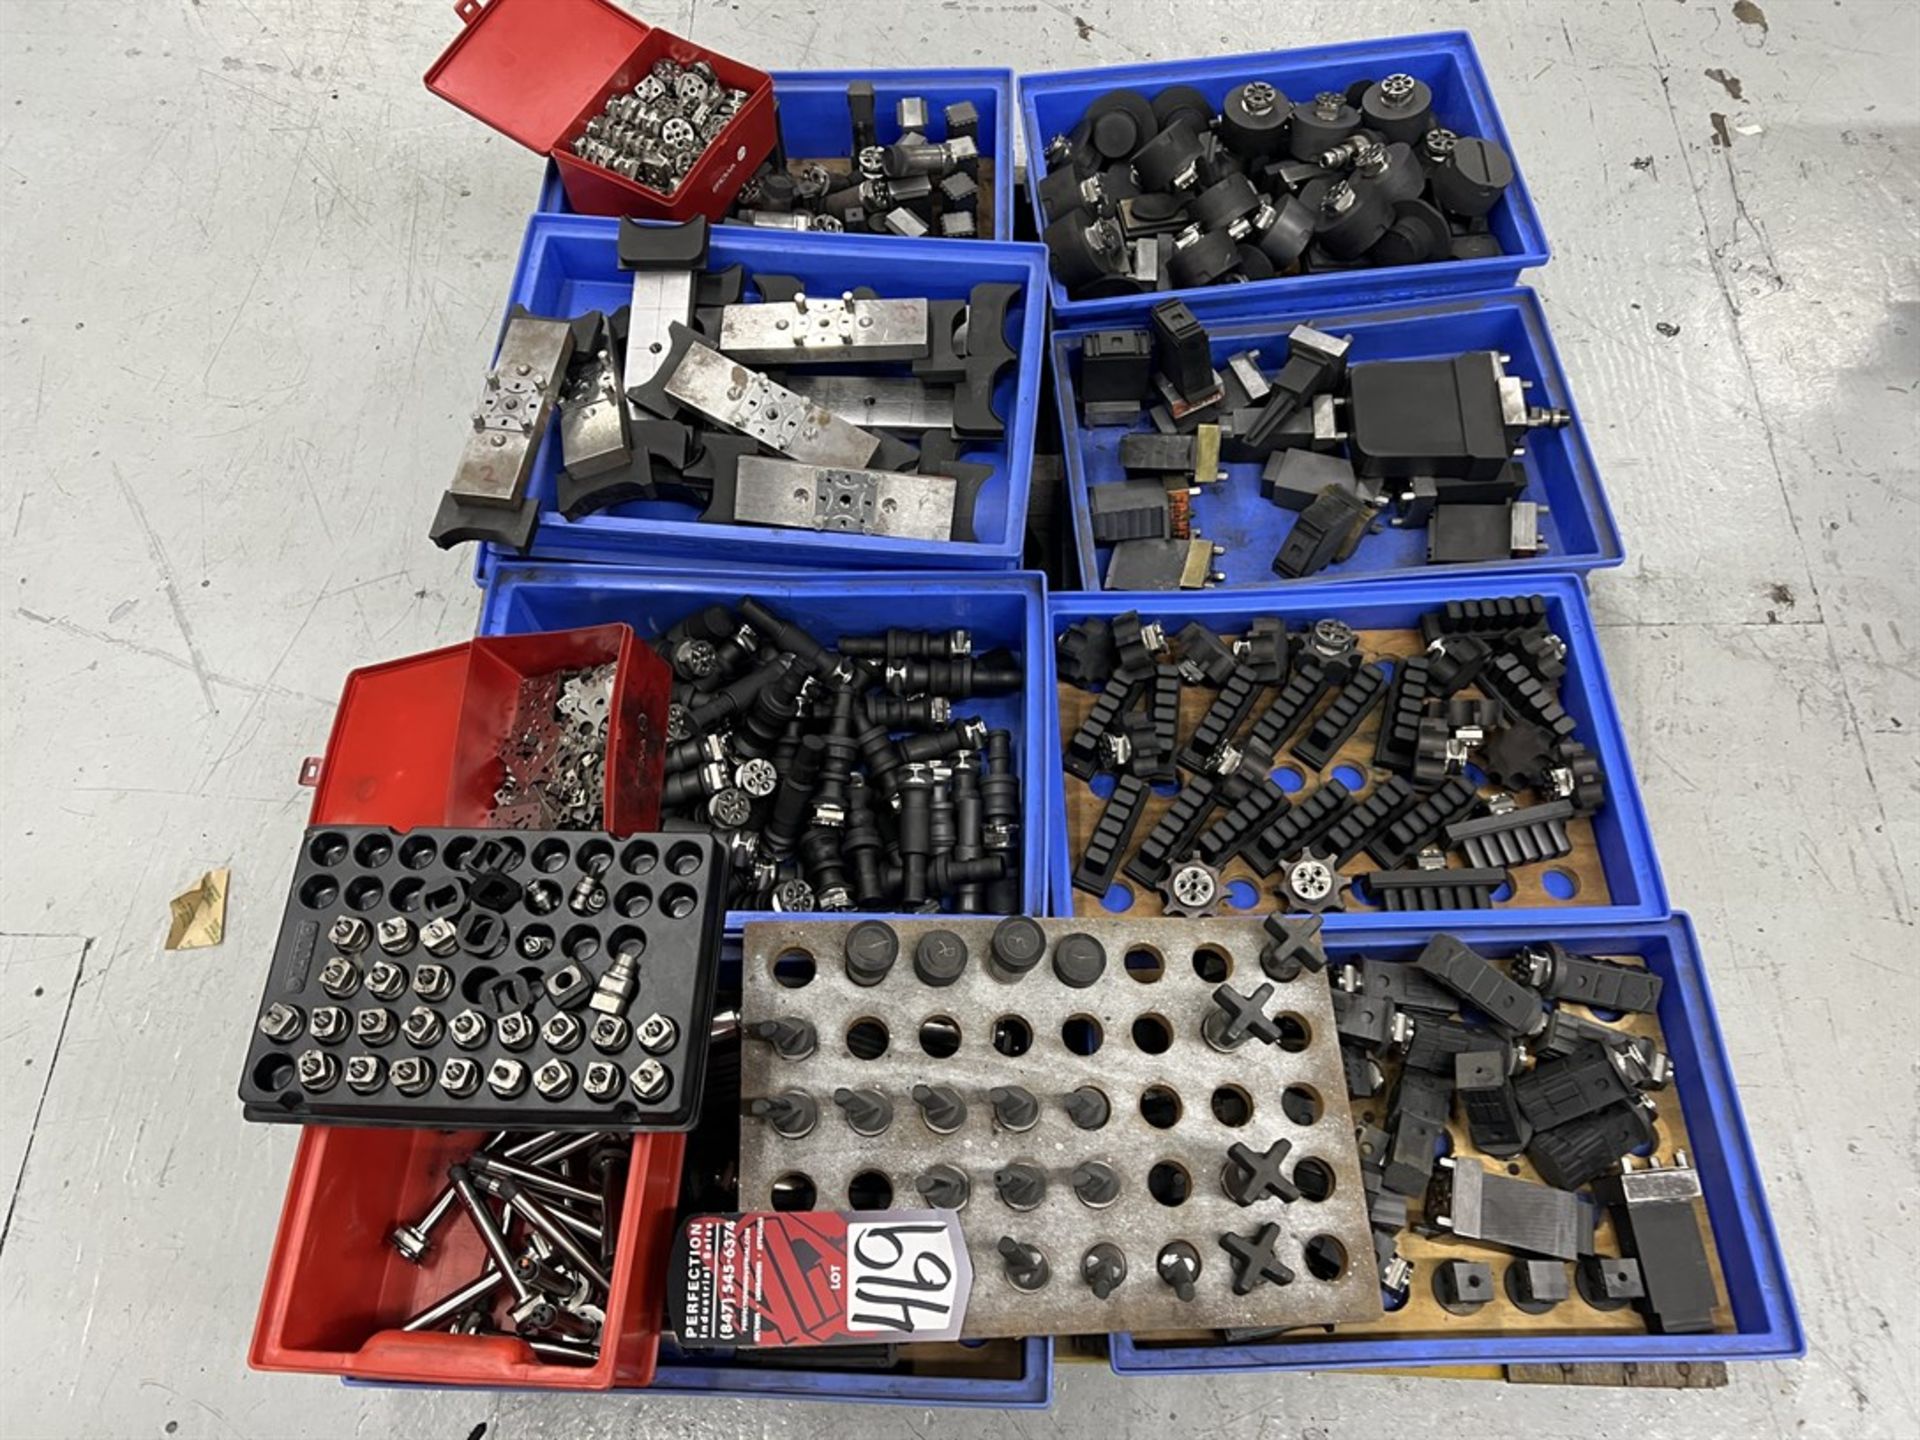 Pallet of Assorted EROWA EDM Tooling, Fixtures, and Electrodes - Image 2 of 4